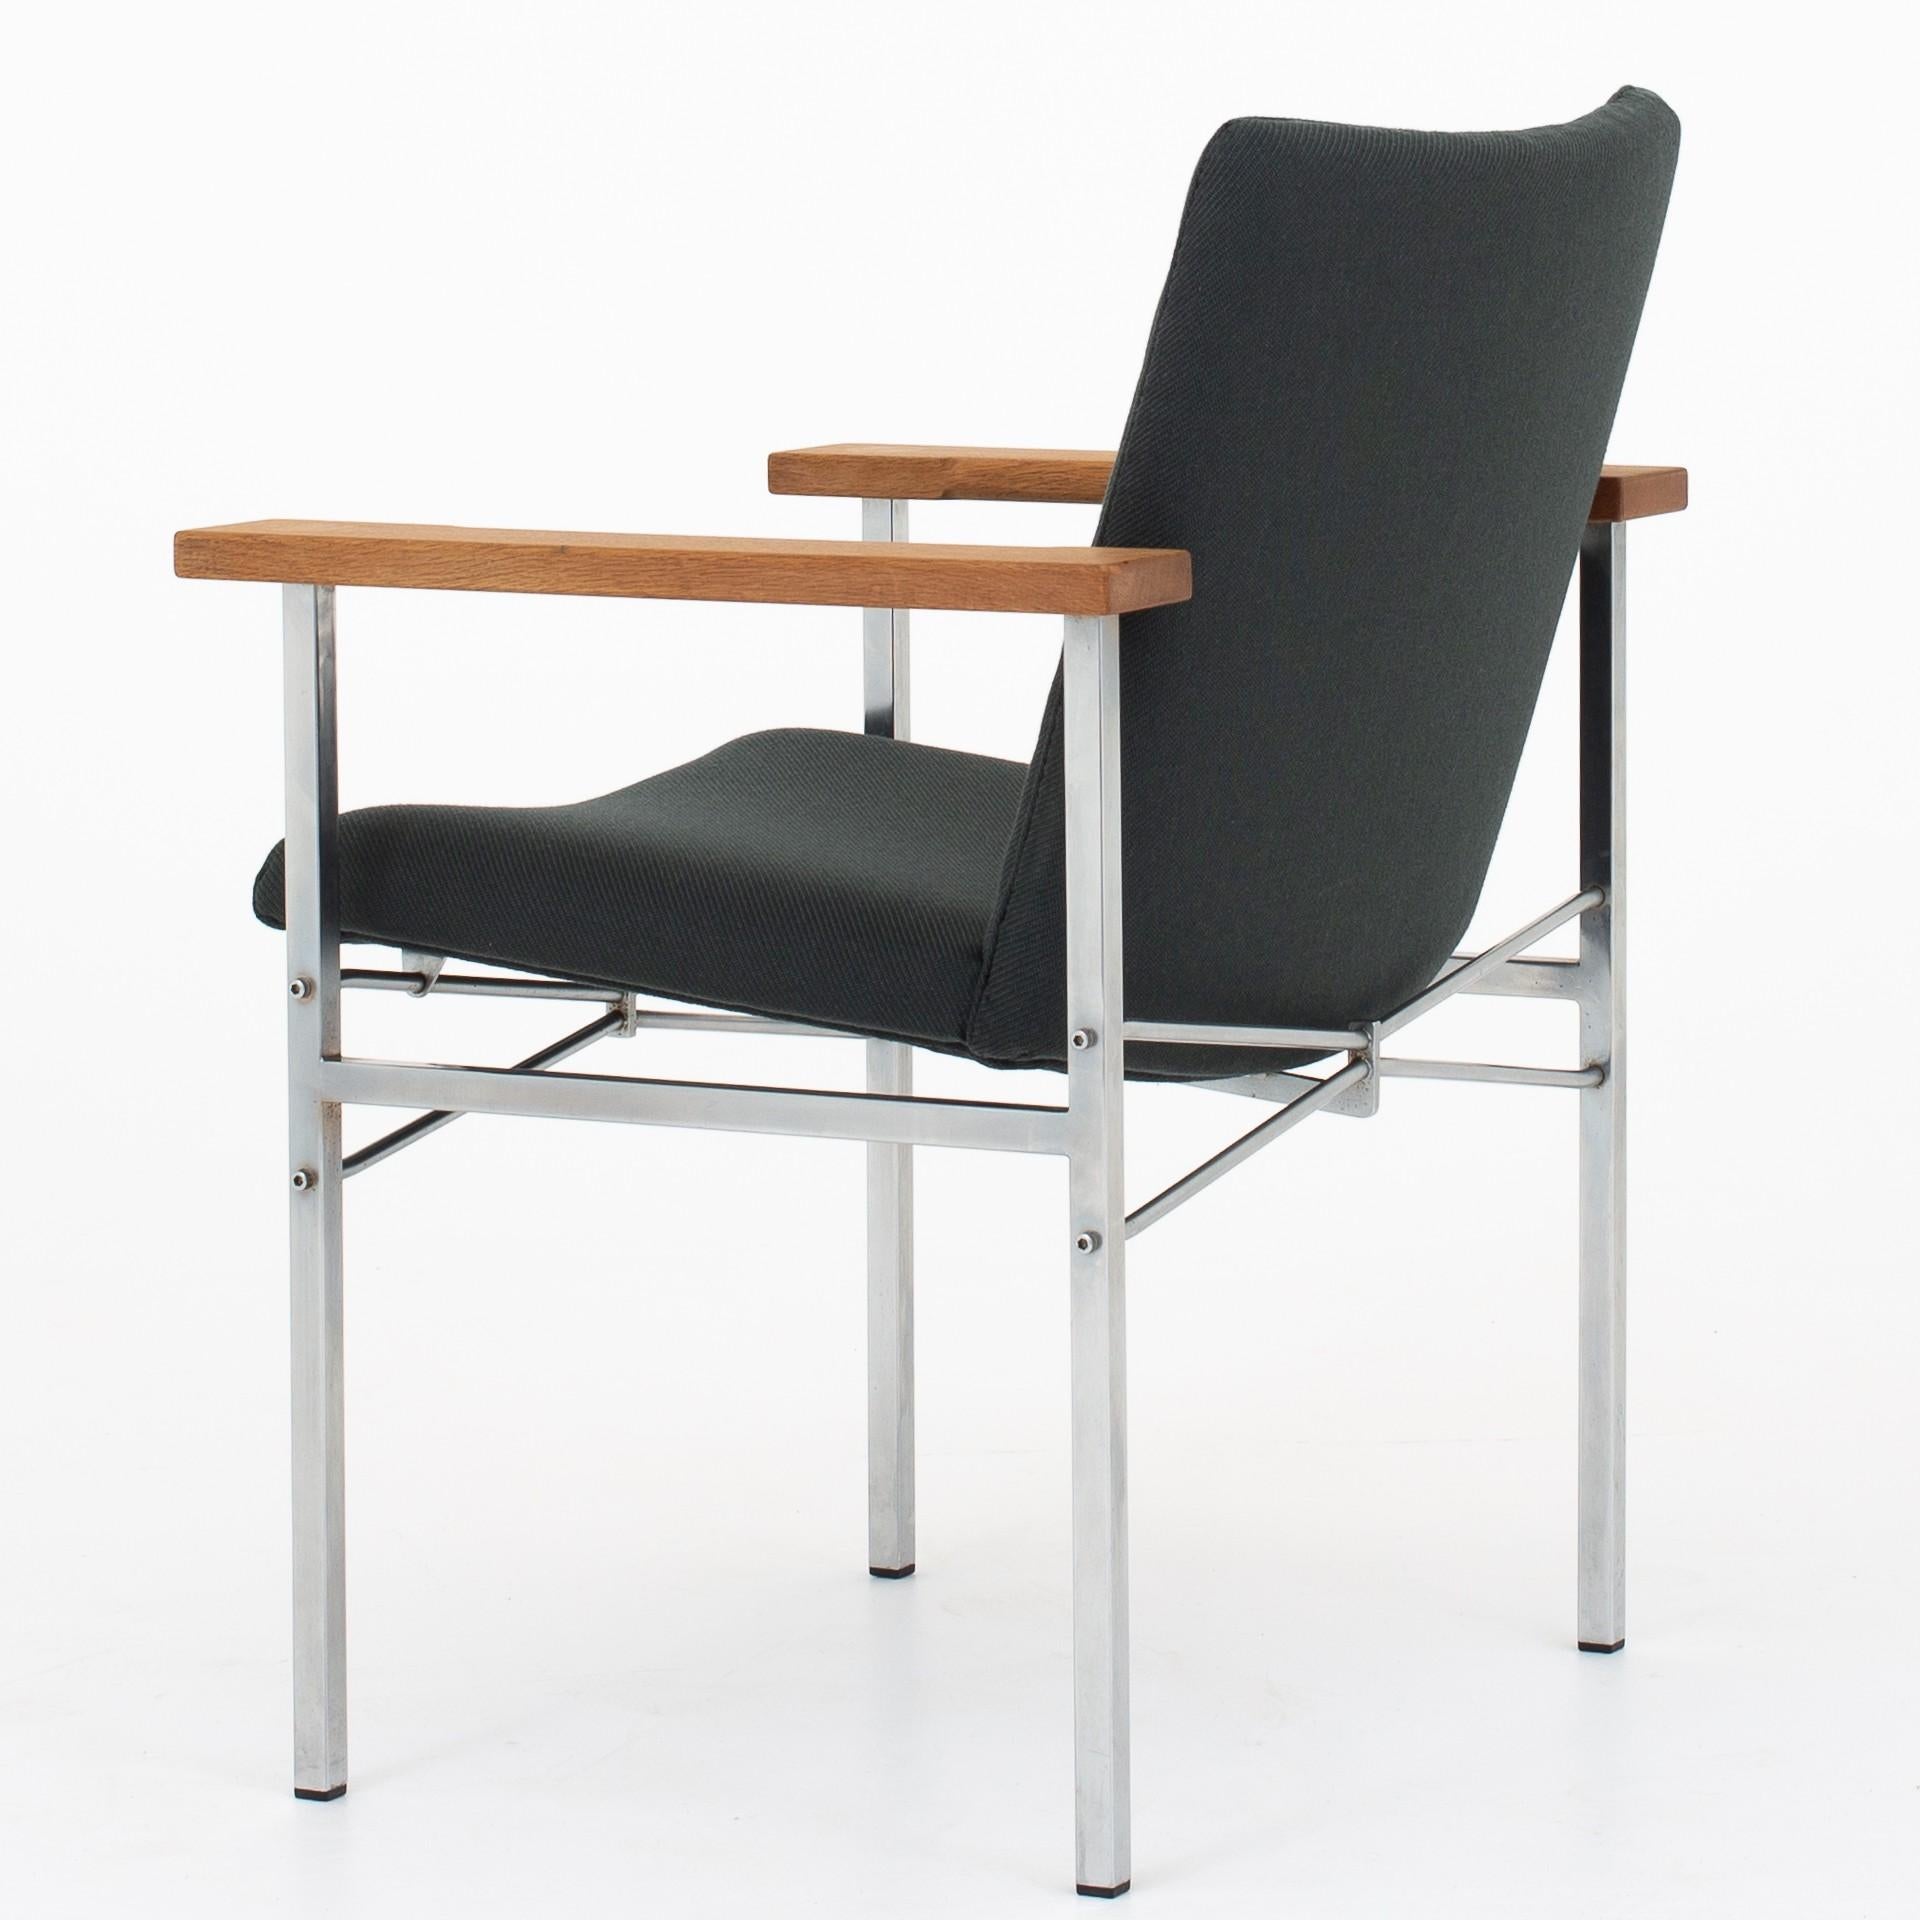 JH 704 - Armchair in steel and oak, reupholstered with twill weave wool from Kvadrat (col. 990). Maker Johannes Hansen.